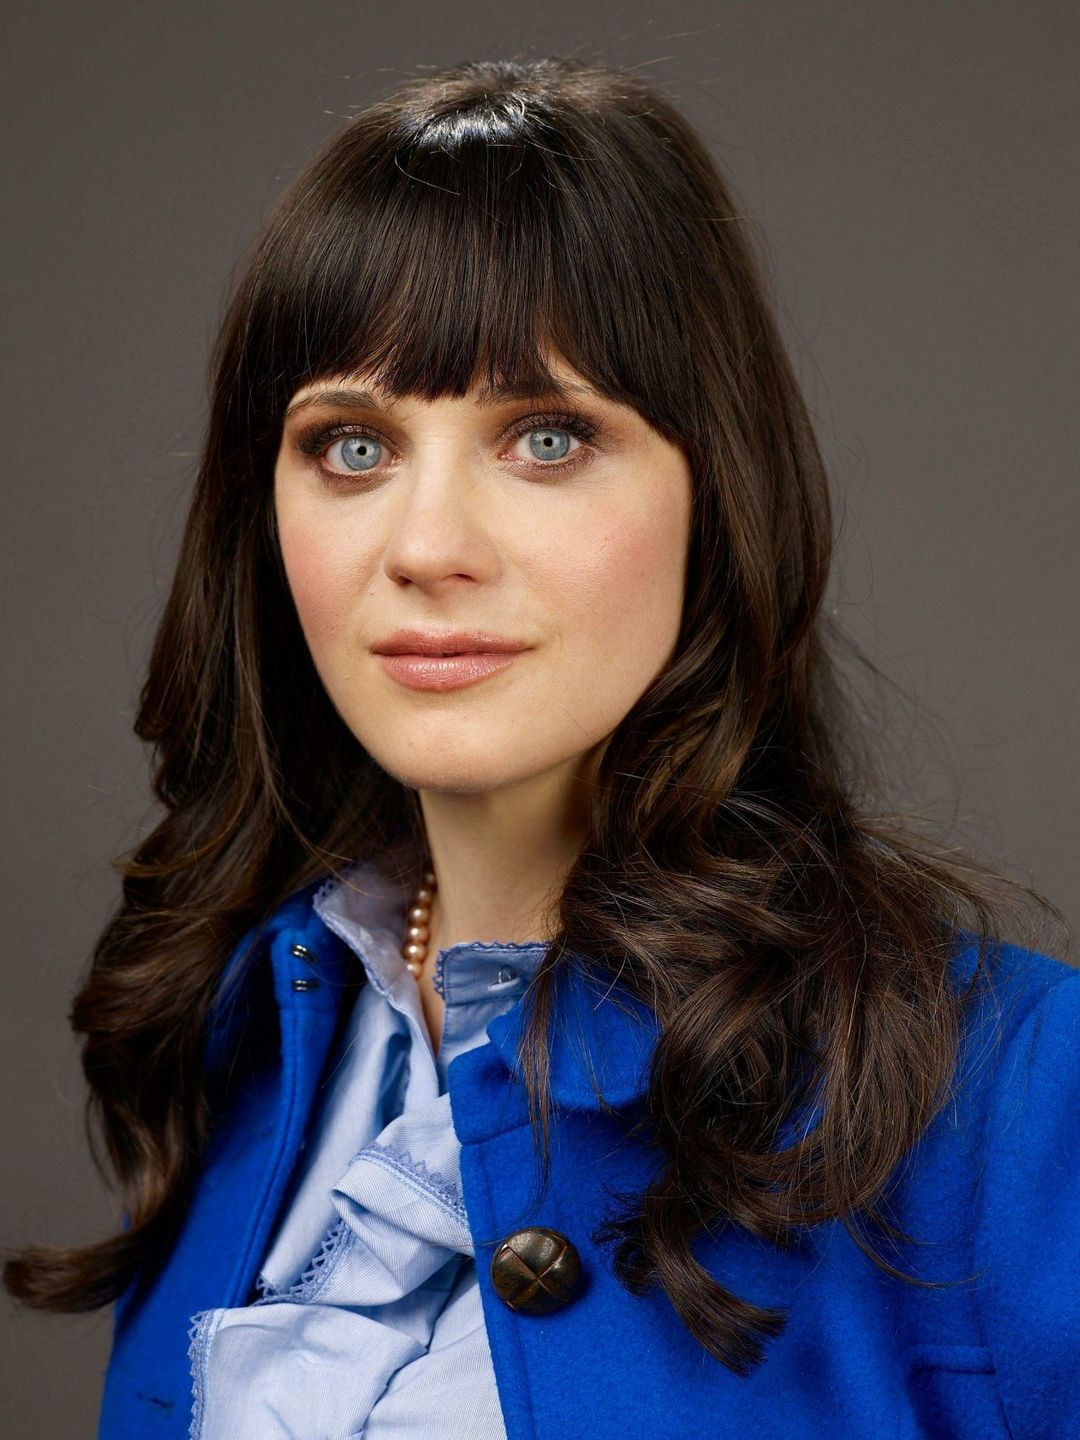 Zooey Deschanel does she have a husband